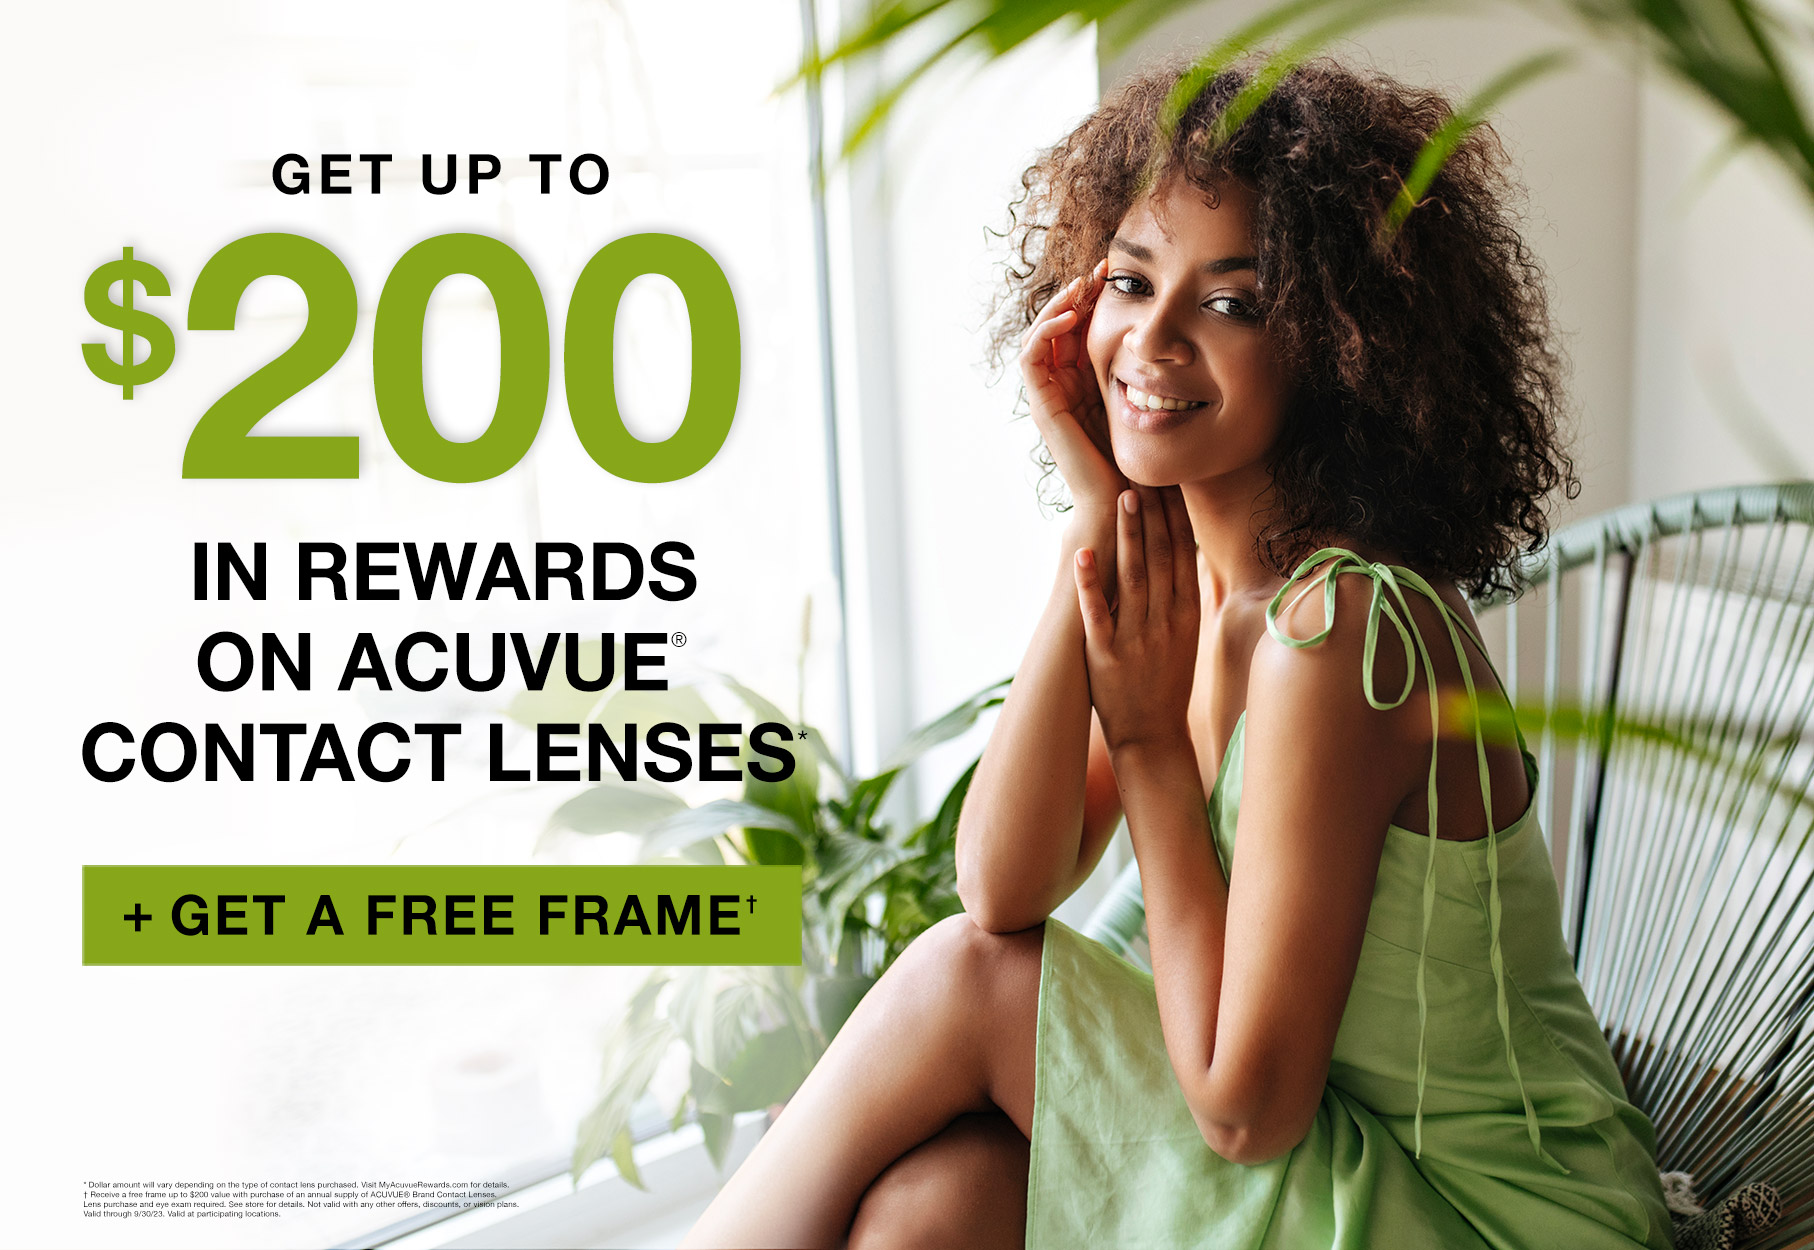 Text: Get up to $200 in rewards on acuvue contact lenses* plus get a free frame† * Dollar amount will vary depending on the type of contact lens purchased. Visit MyAcuvueRewards.com for details. † Receive a free frame up to $200 value with purchase of an annual supply of ACUVUE® Brand Contact Lenses. Lens purchase and eye exam required. See store for details. Not valid with any other offers, discounts, or vision plans. Valid at participating locations. Valid through 9/30/23. Photo: Girl sitting down in chair with plants wearing a green dress